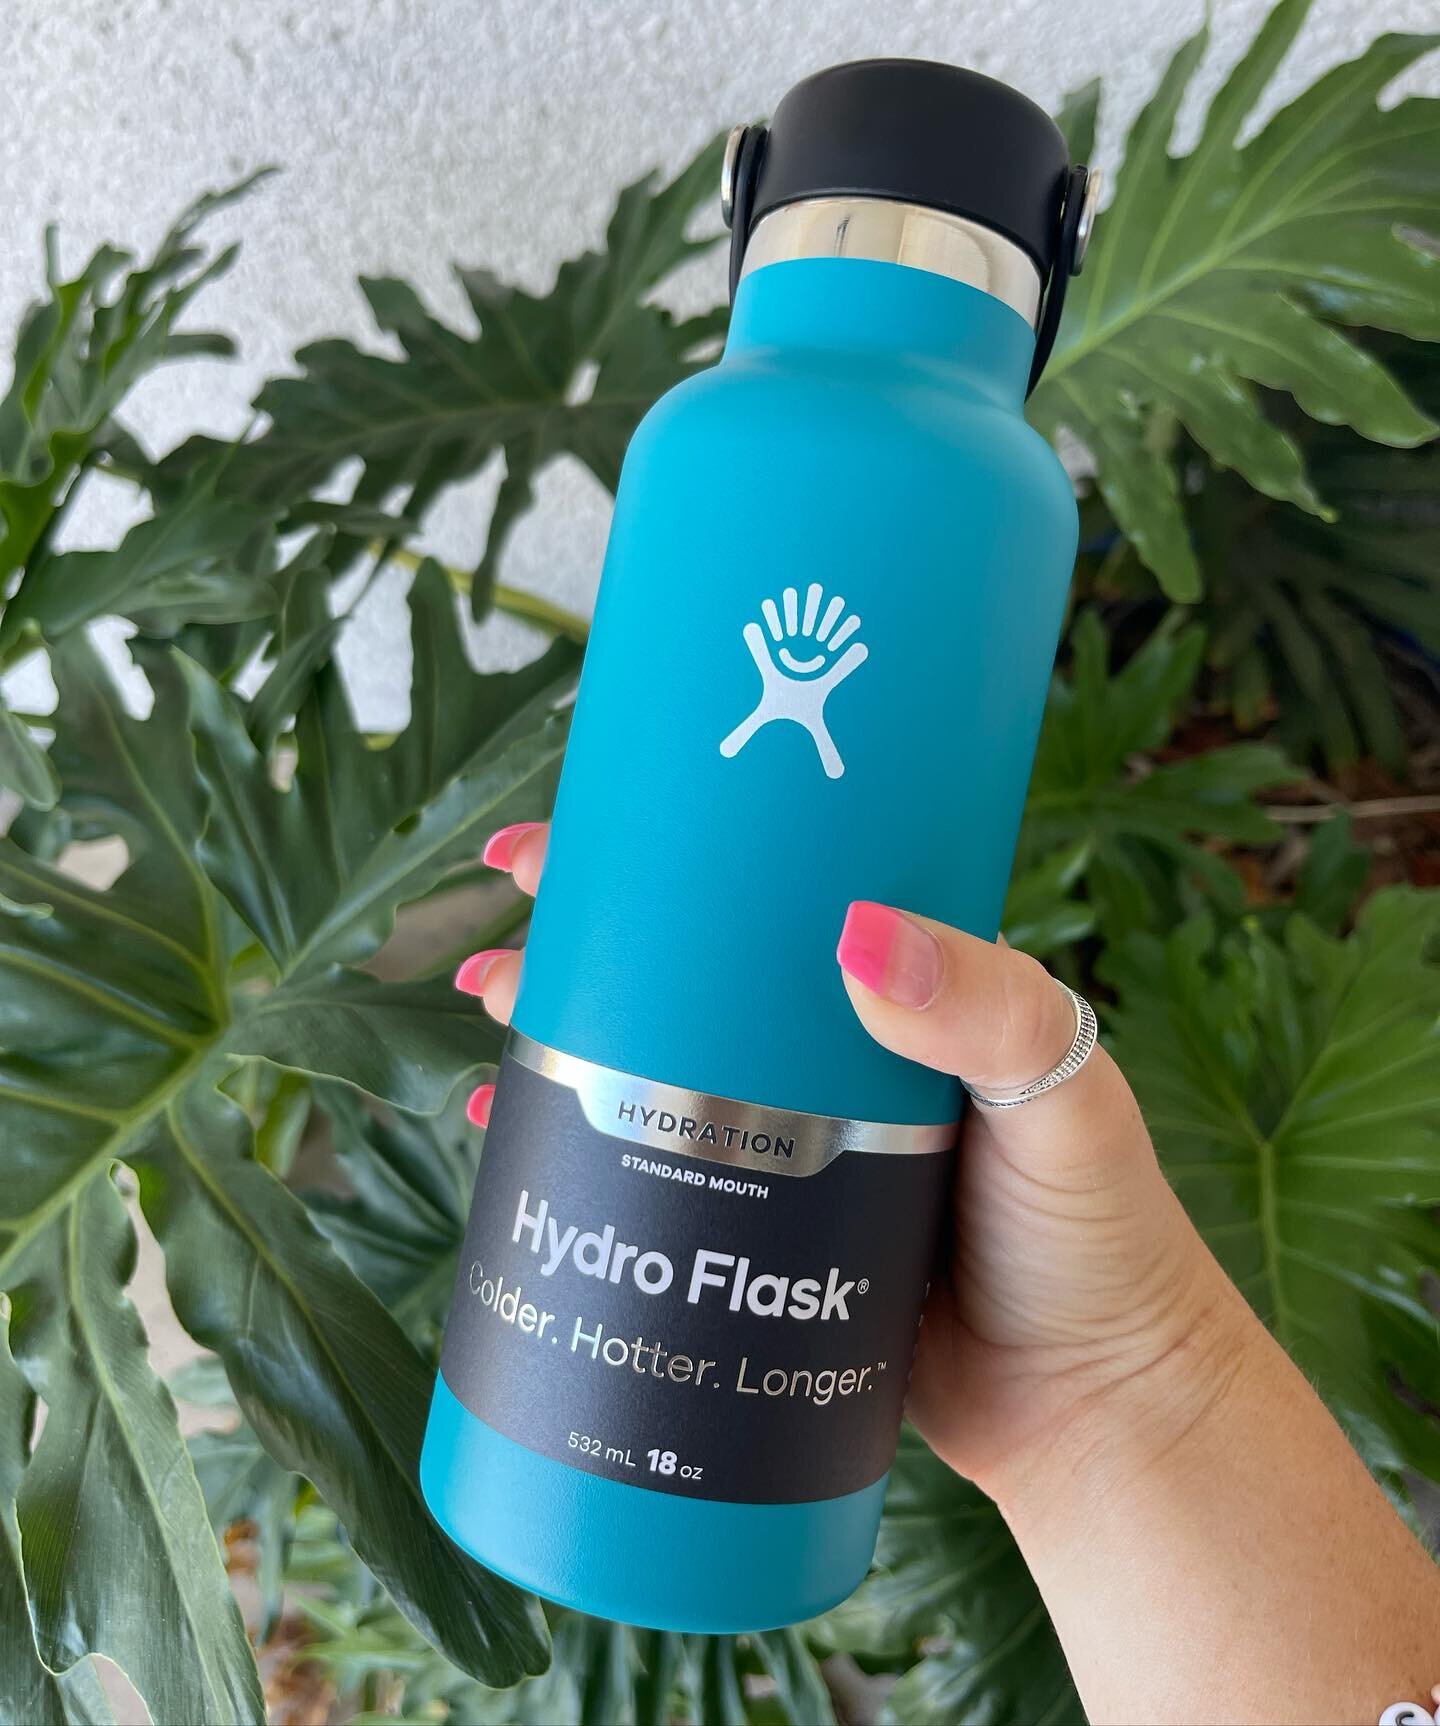 Consider this your reminder: Drink Your Water! 💧💧💧 #hydroflask